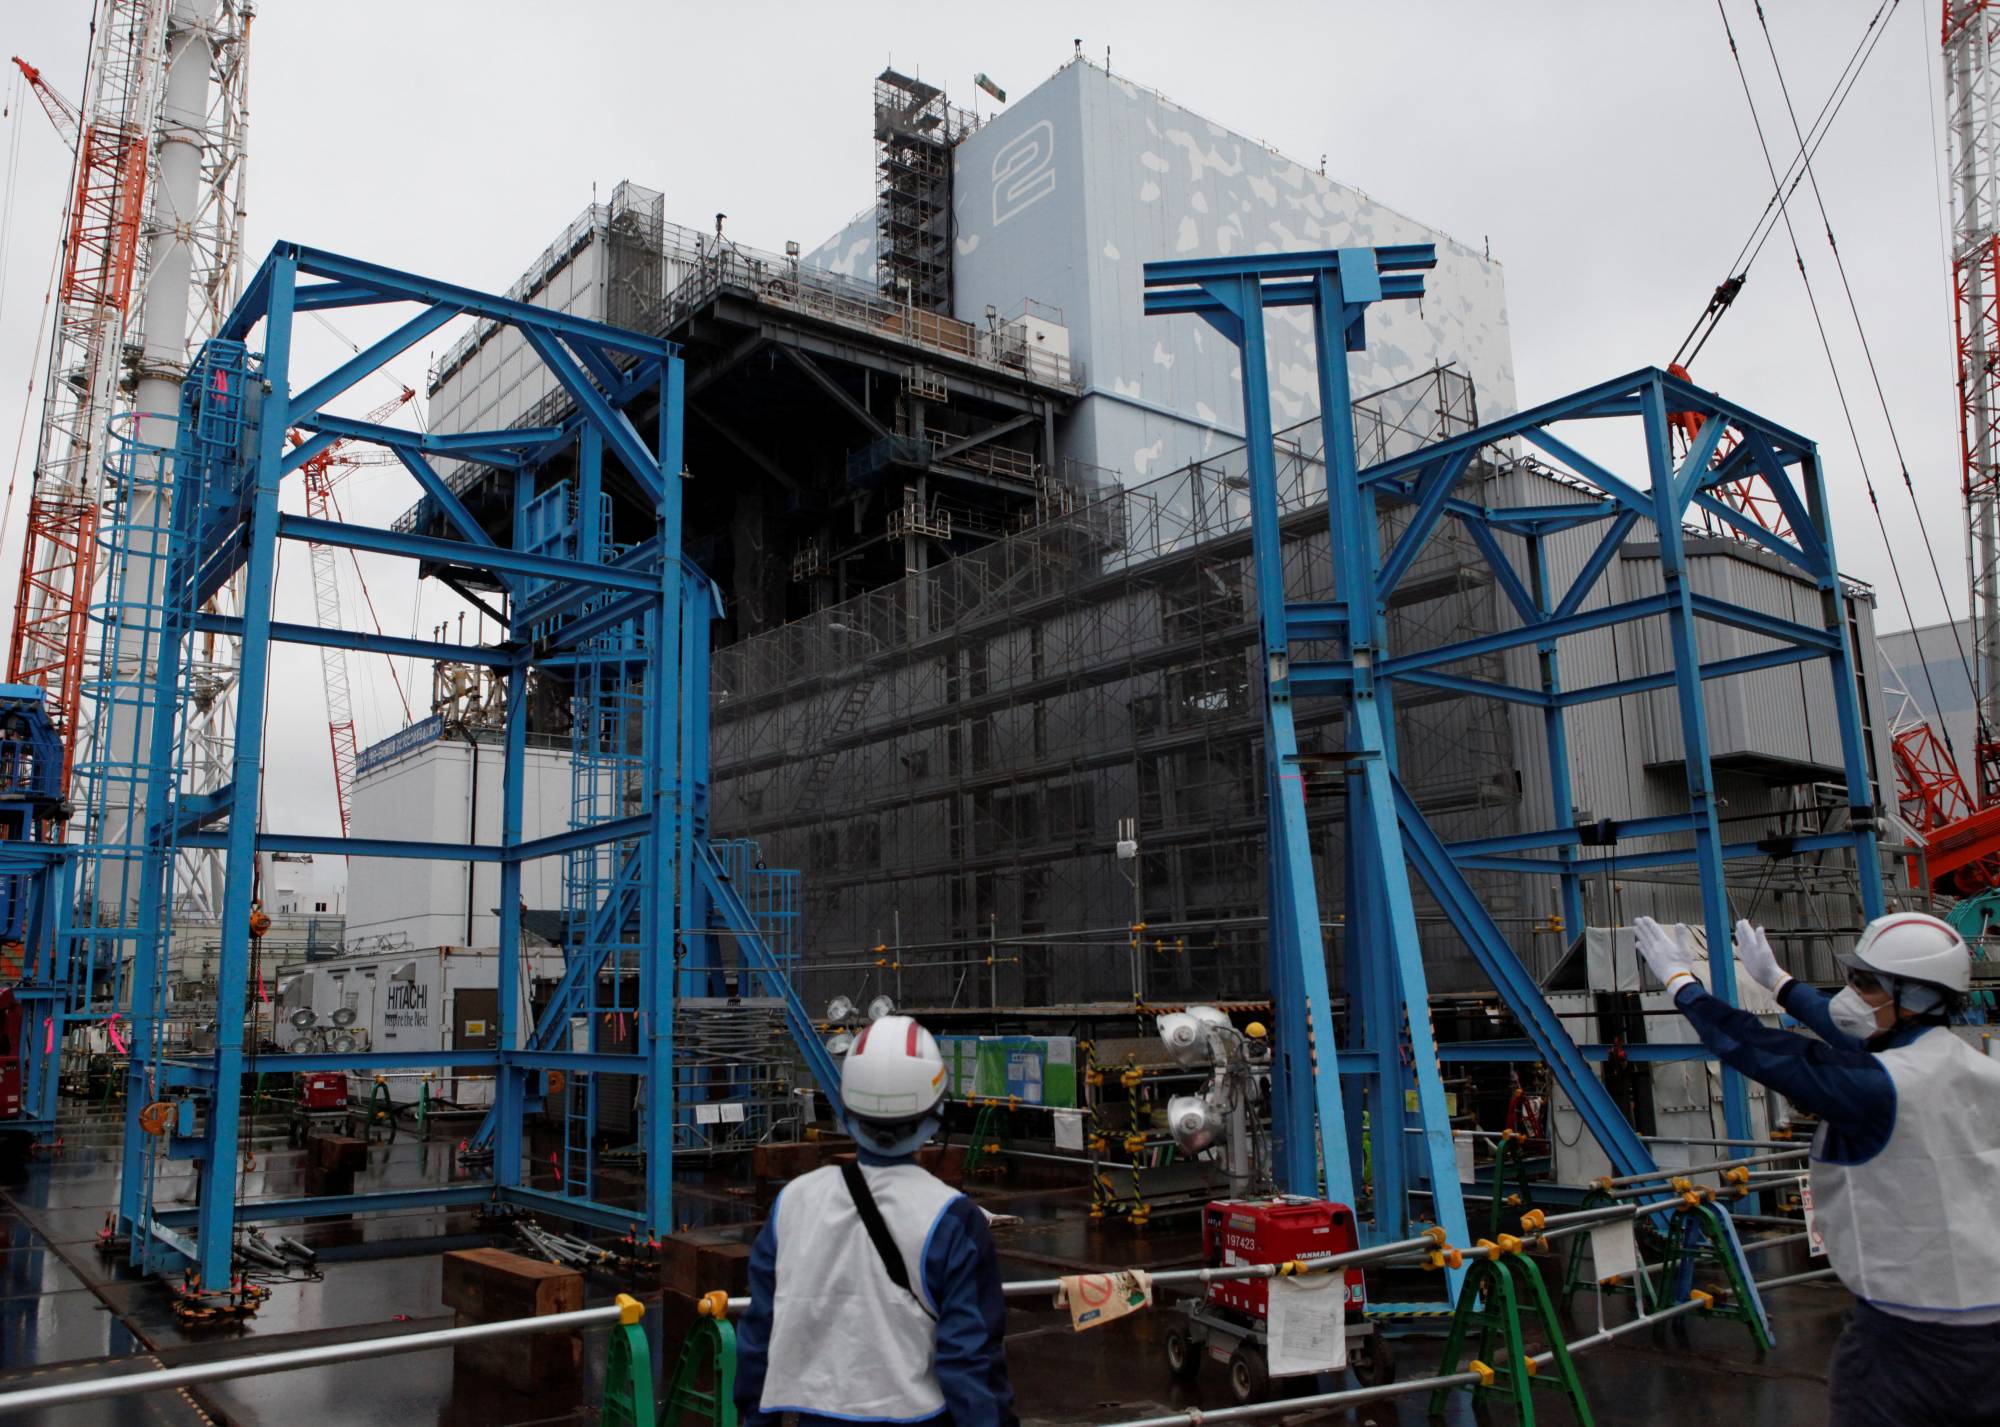 Workers are seen last year near the No. 2 reactor building at the disaster-hit Fukushima No. 1 nuclear plant. | REUTERS